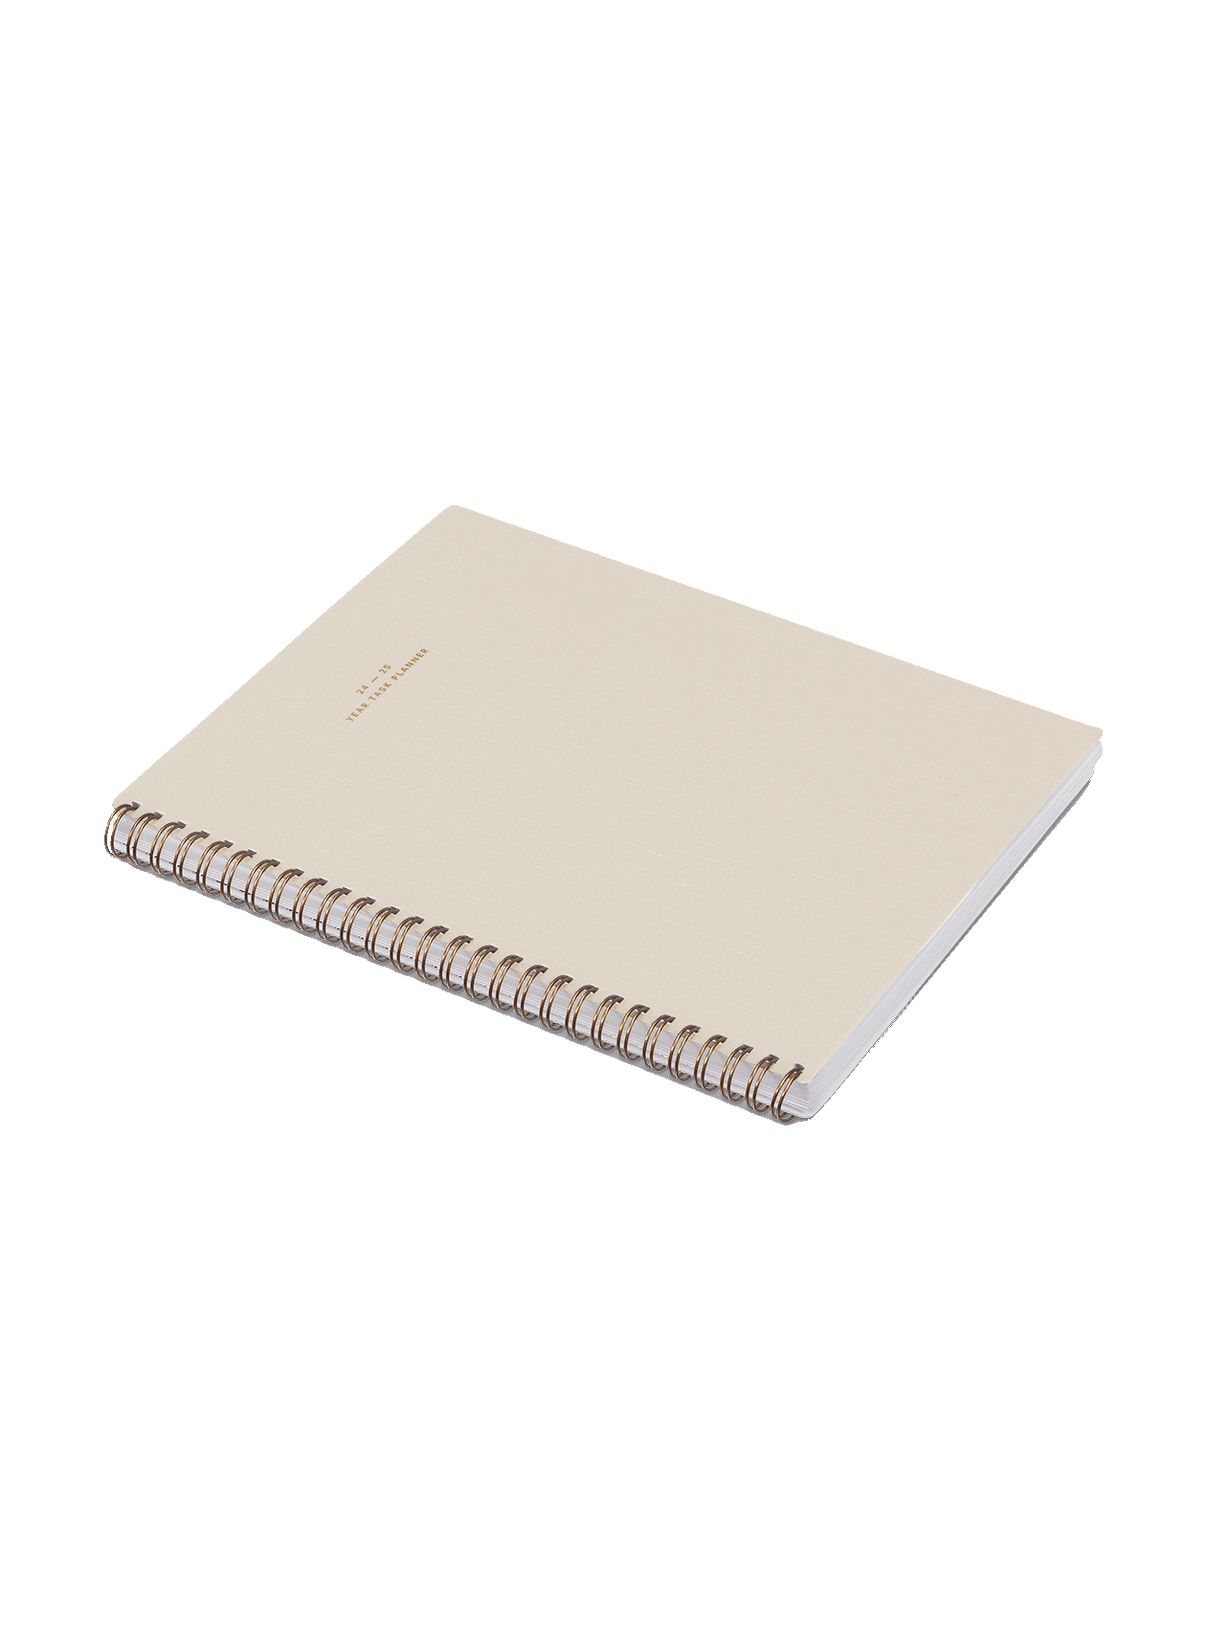 Appointed Year Task Planner with brass wire-o binding, foil stamped details, and durable water-resistant bookcloth side angle